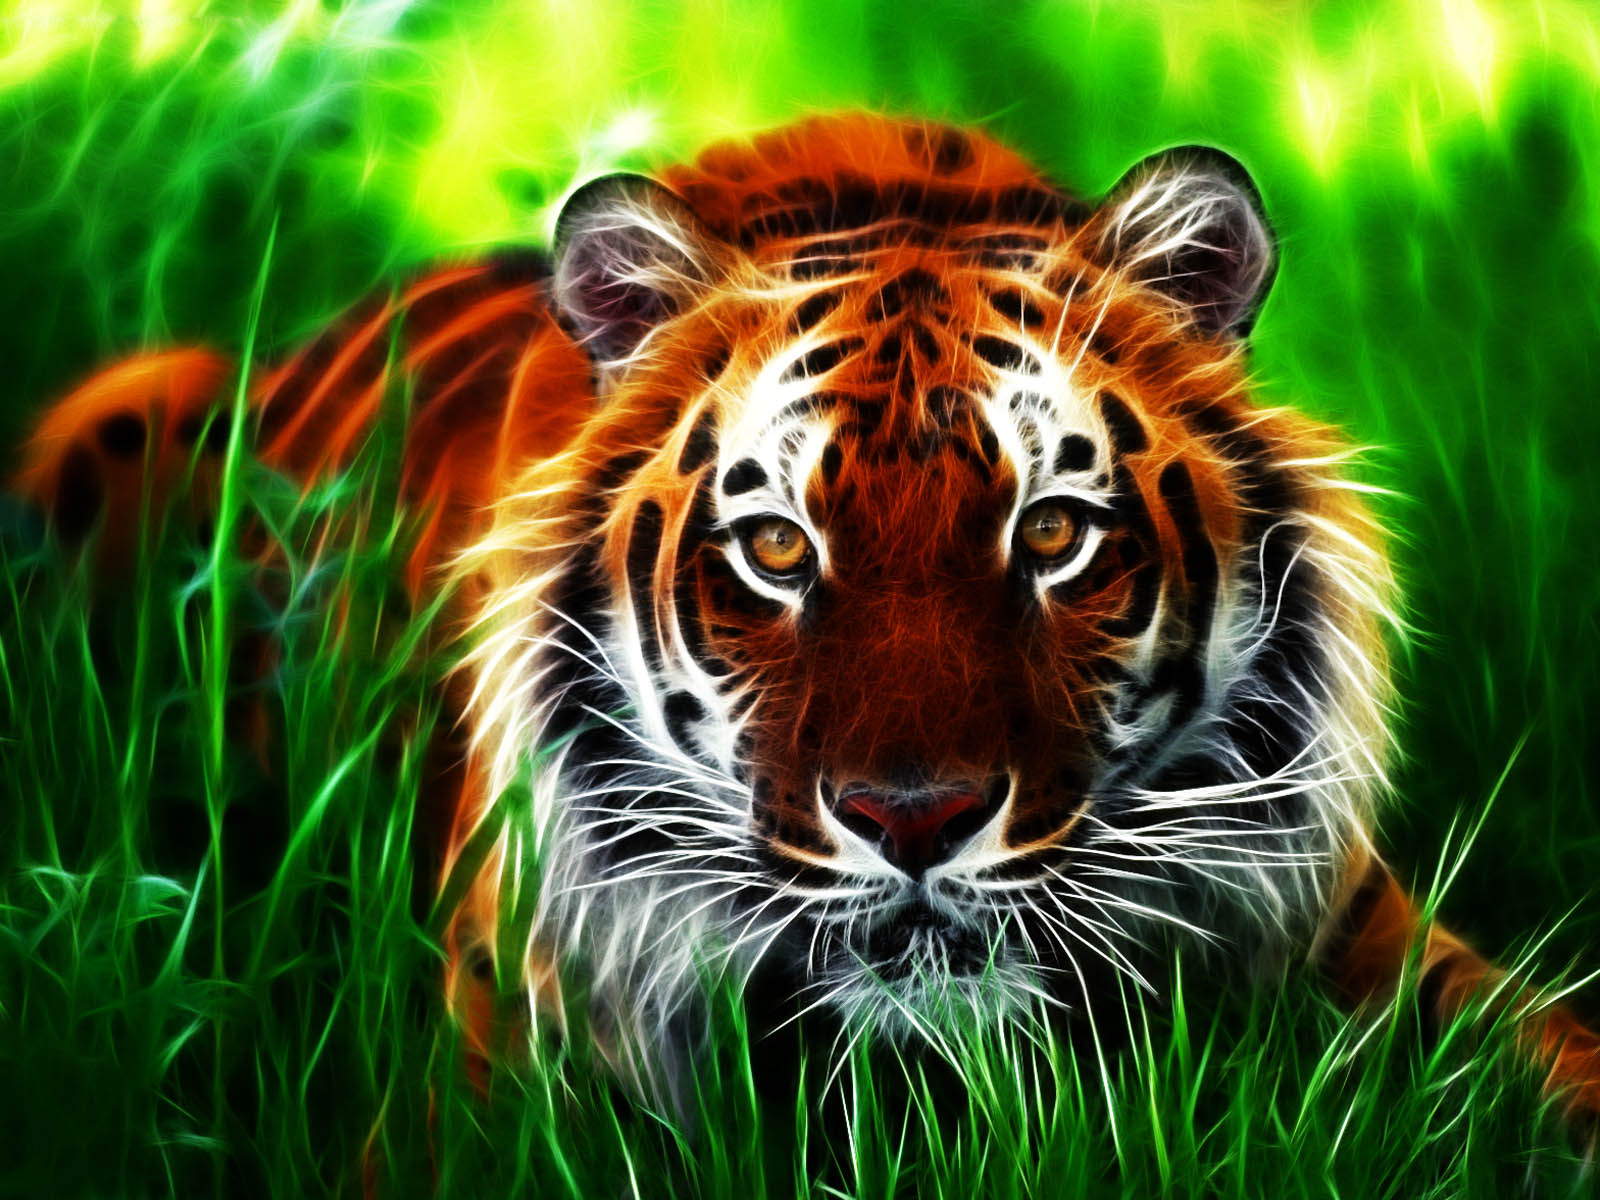 Download Tigers wallpapers for mobile phone free Tigers HD pictures